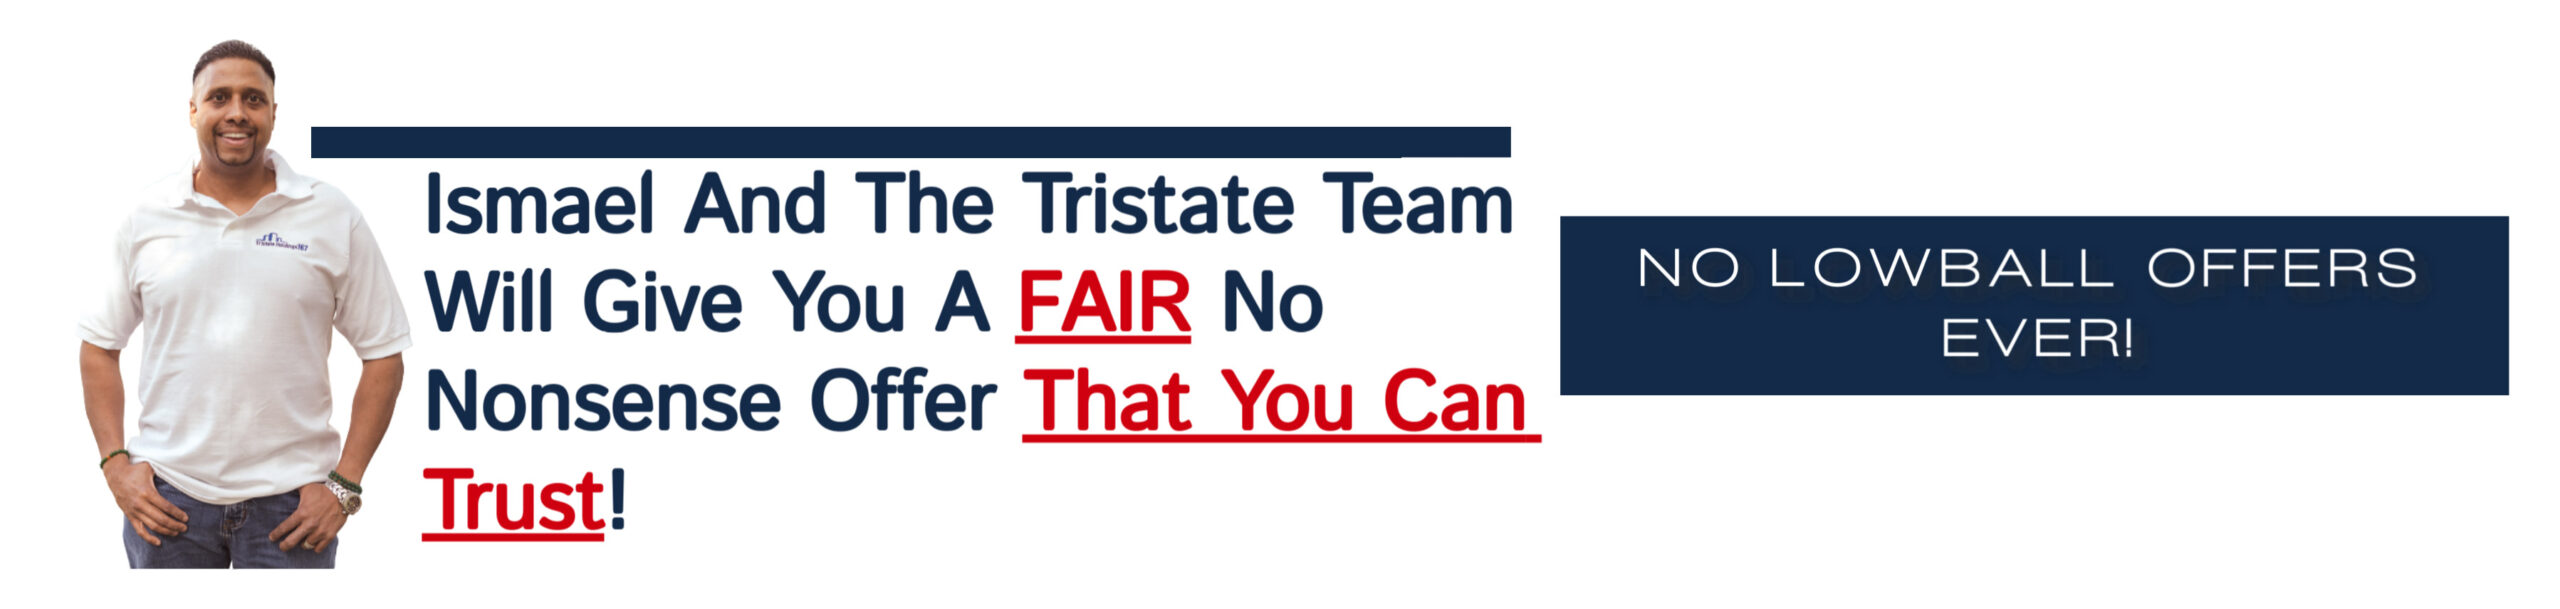 Ismael and the tristate team will give you a fair no nonsense offer that you can trust! No low ball offers ever!